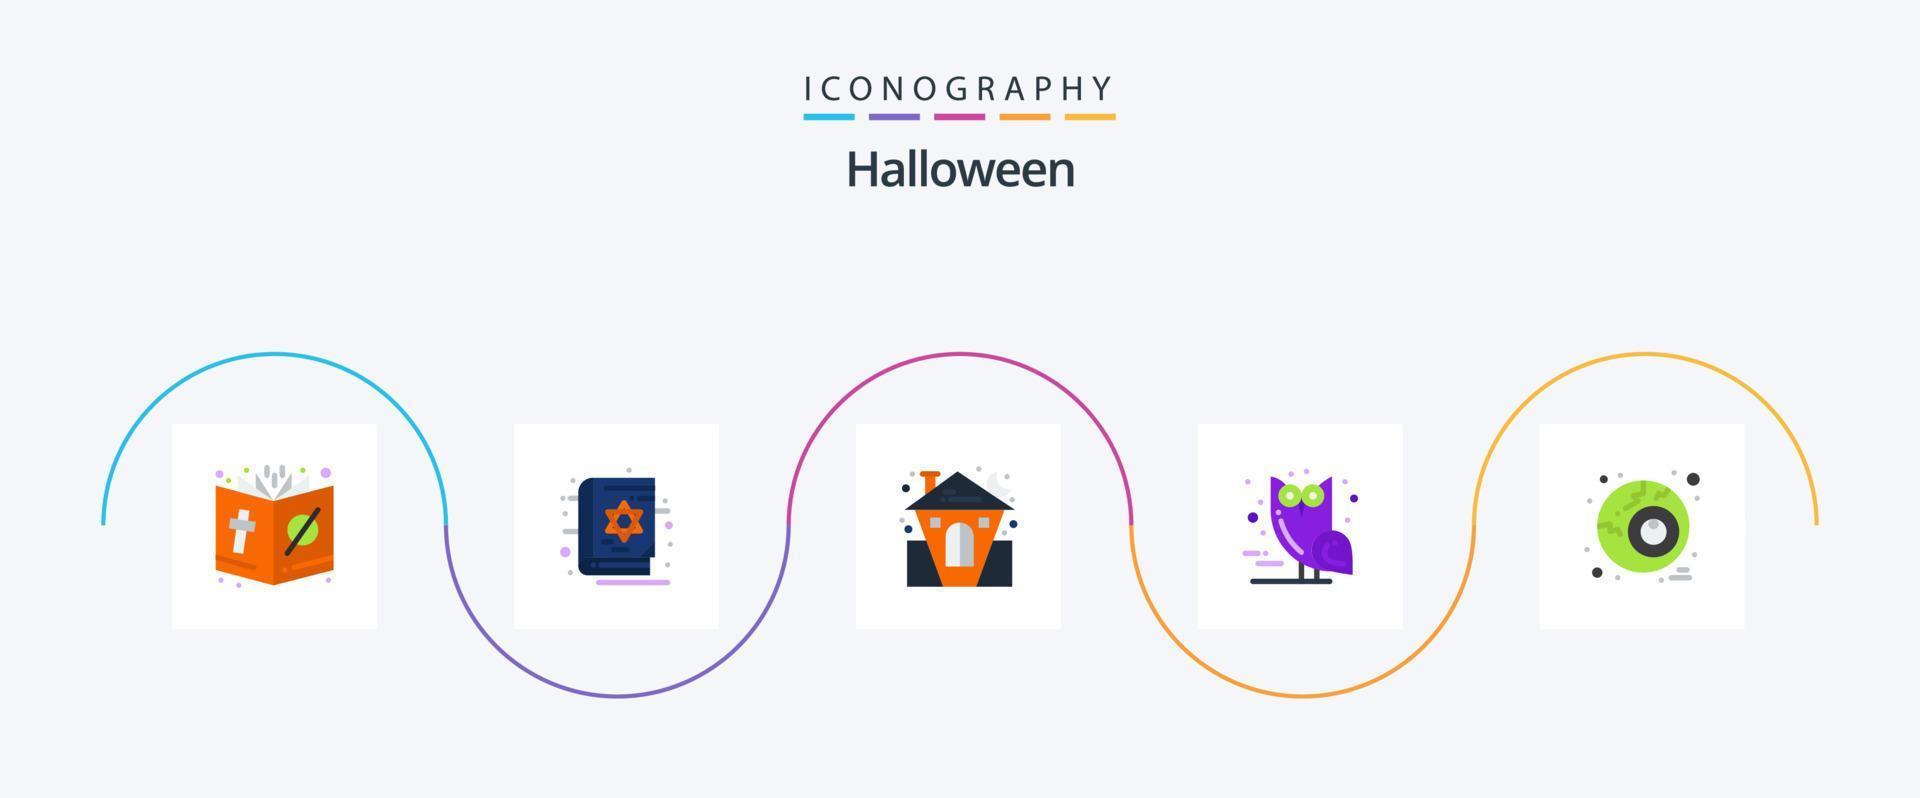 Halloween Flat 5 Icon Pack Including scary. halloween. scary. bird. holiday vector